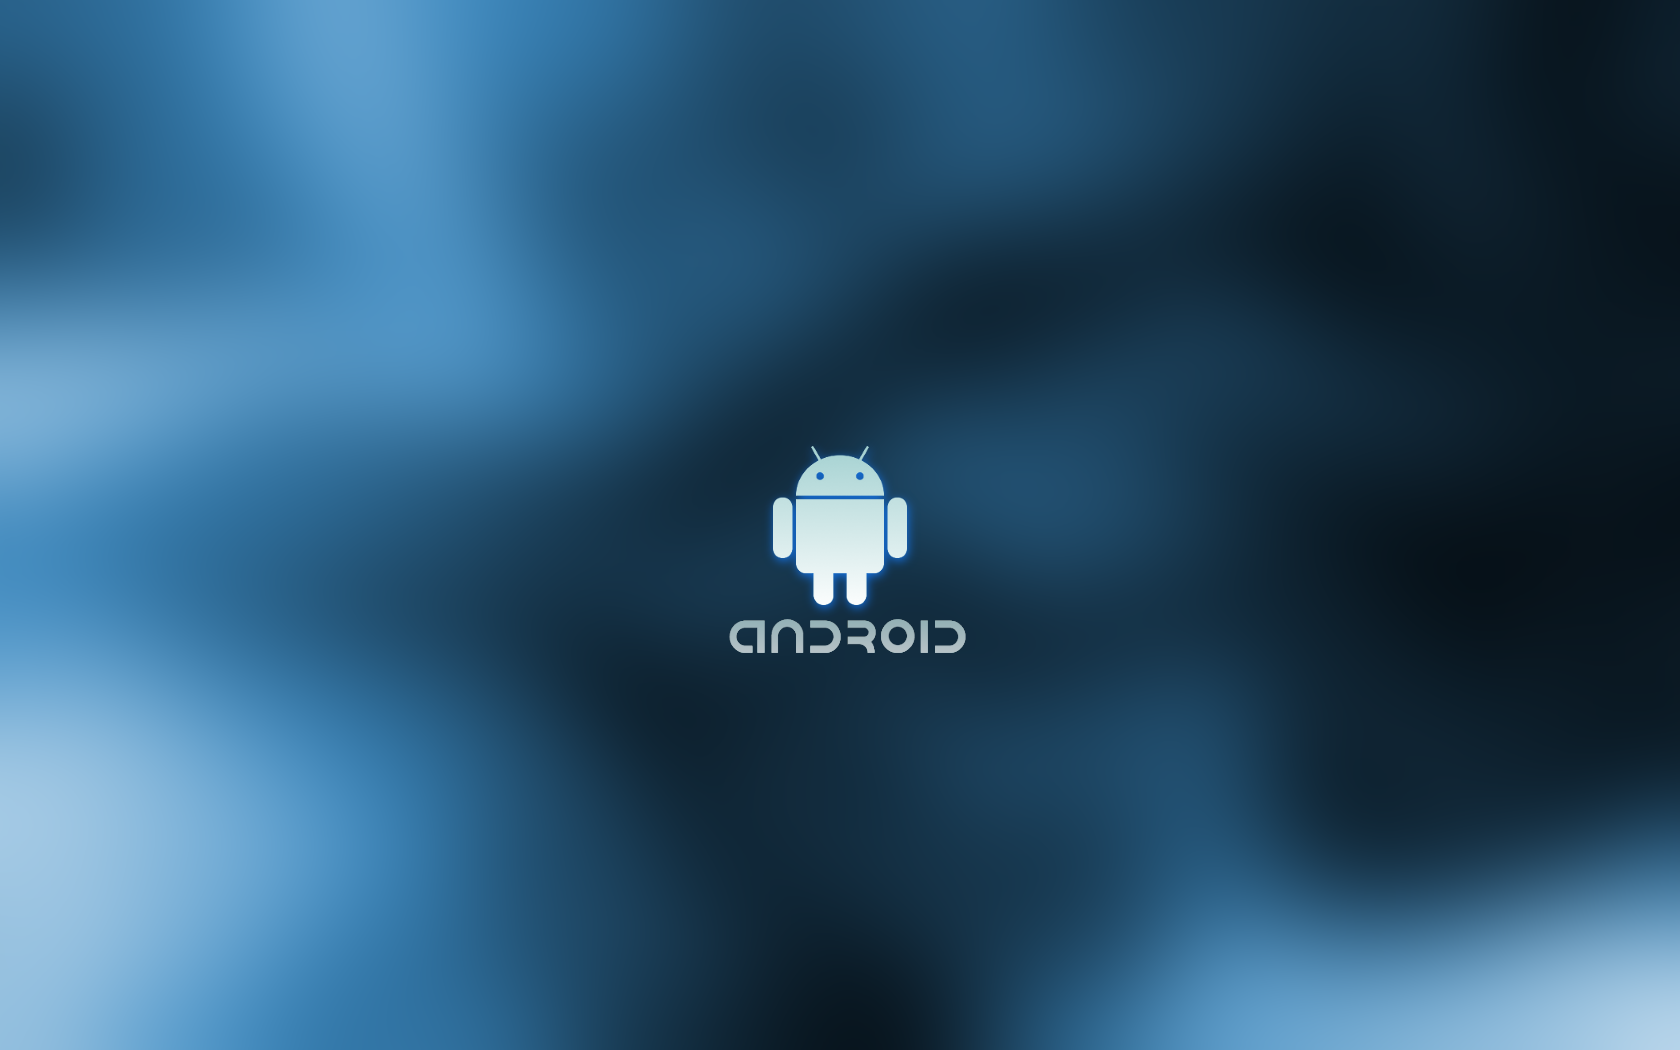 Android L Wallpaper Large Details